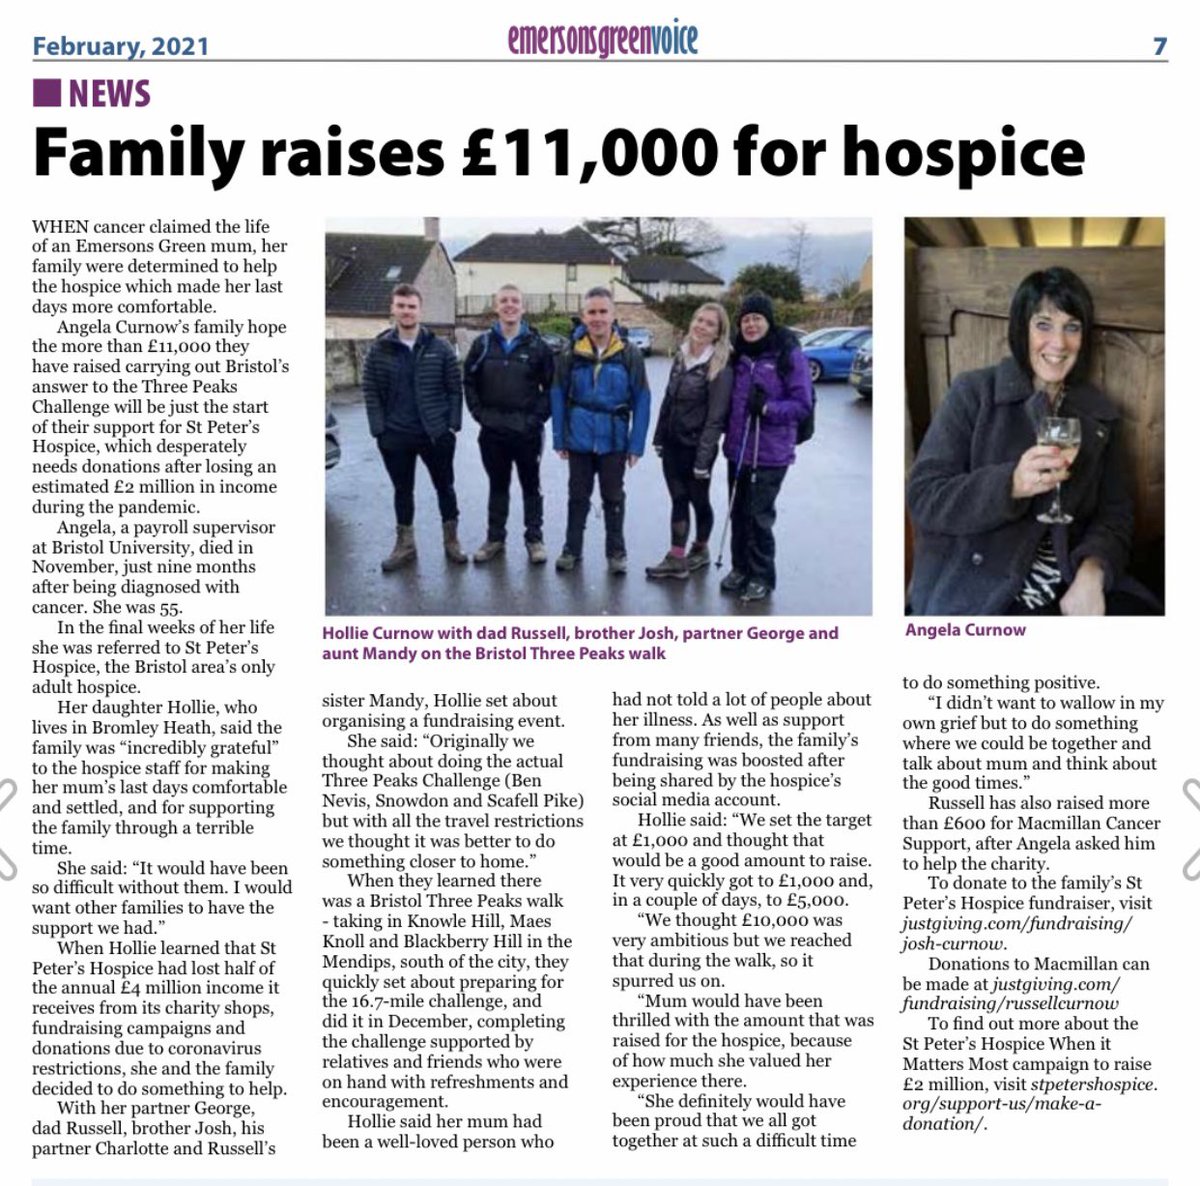 Family raise more than £11,000 to say thank you to St Peter’s Hospice 👏
#WhenItMattersMost 
@stpetershospice @emersonsvoice 
#Bristol #Community @fishpondsvoice